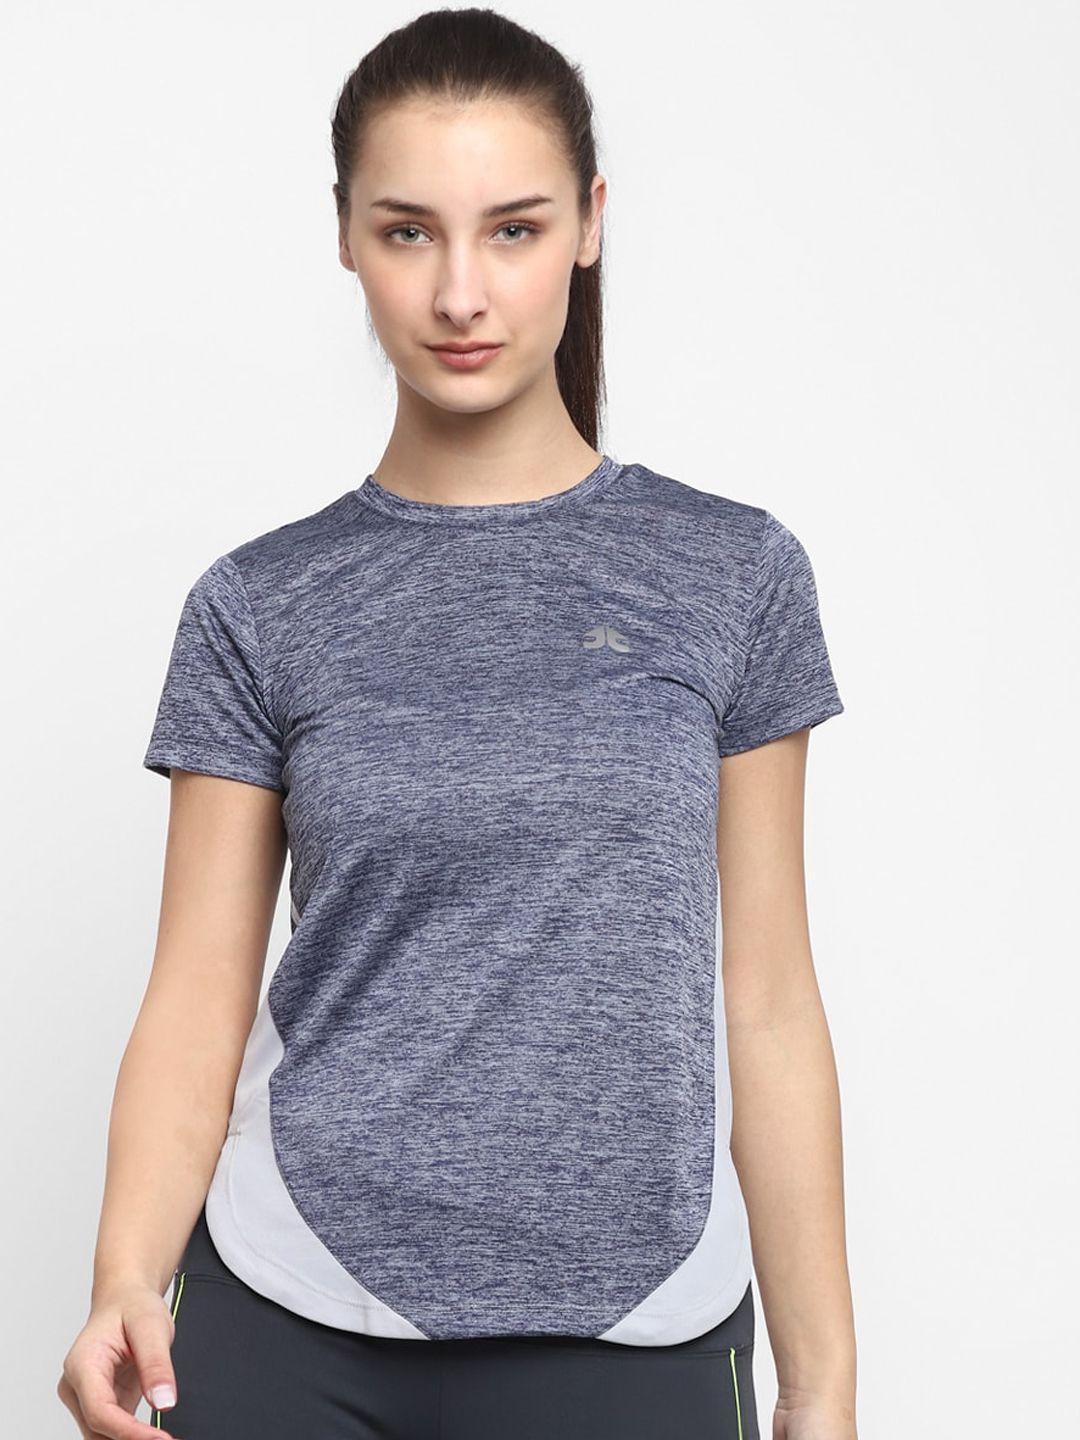 off limits women navy blue solid round neck t-shirt